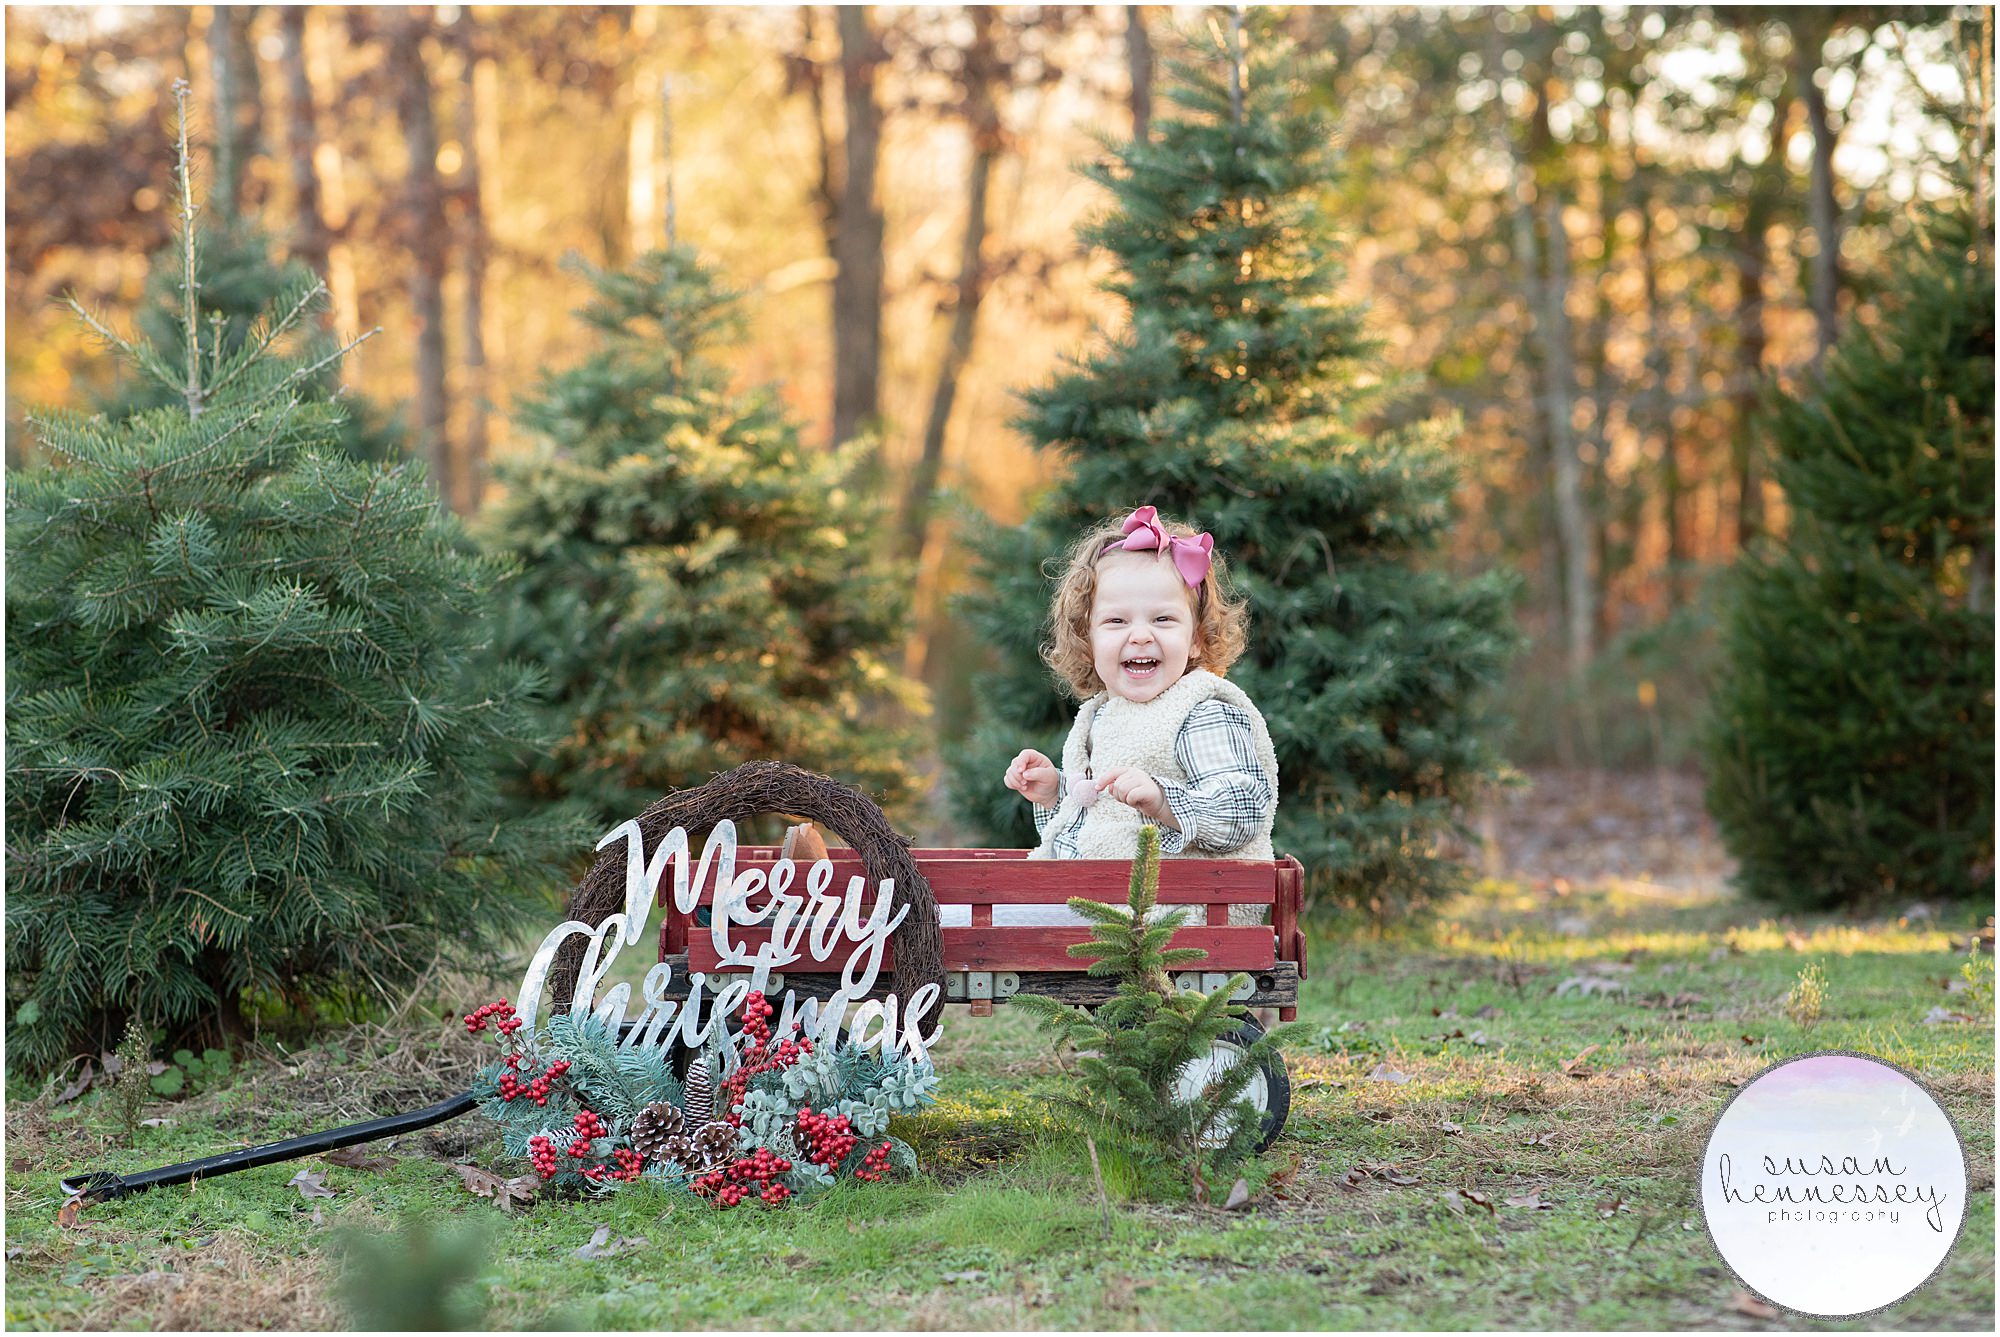 Susan Hennessey Photography, a photographer based in Moorestown photographs yearly South Jersey holiday family photo sessions at Christmas Tree Farms.